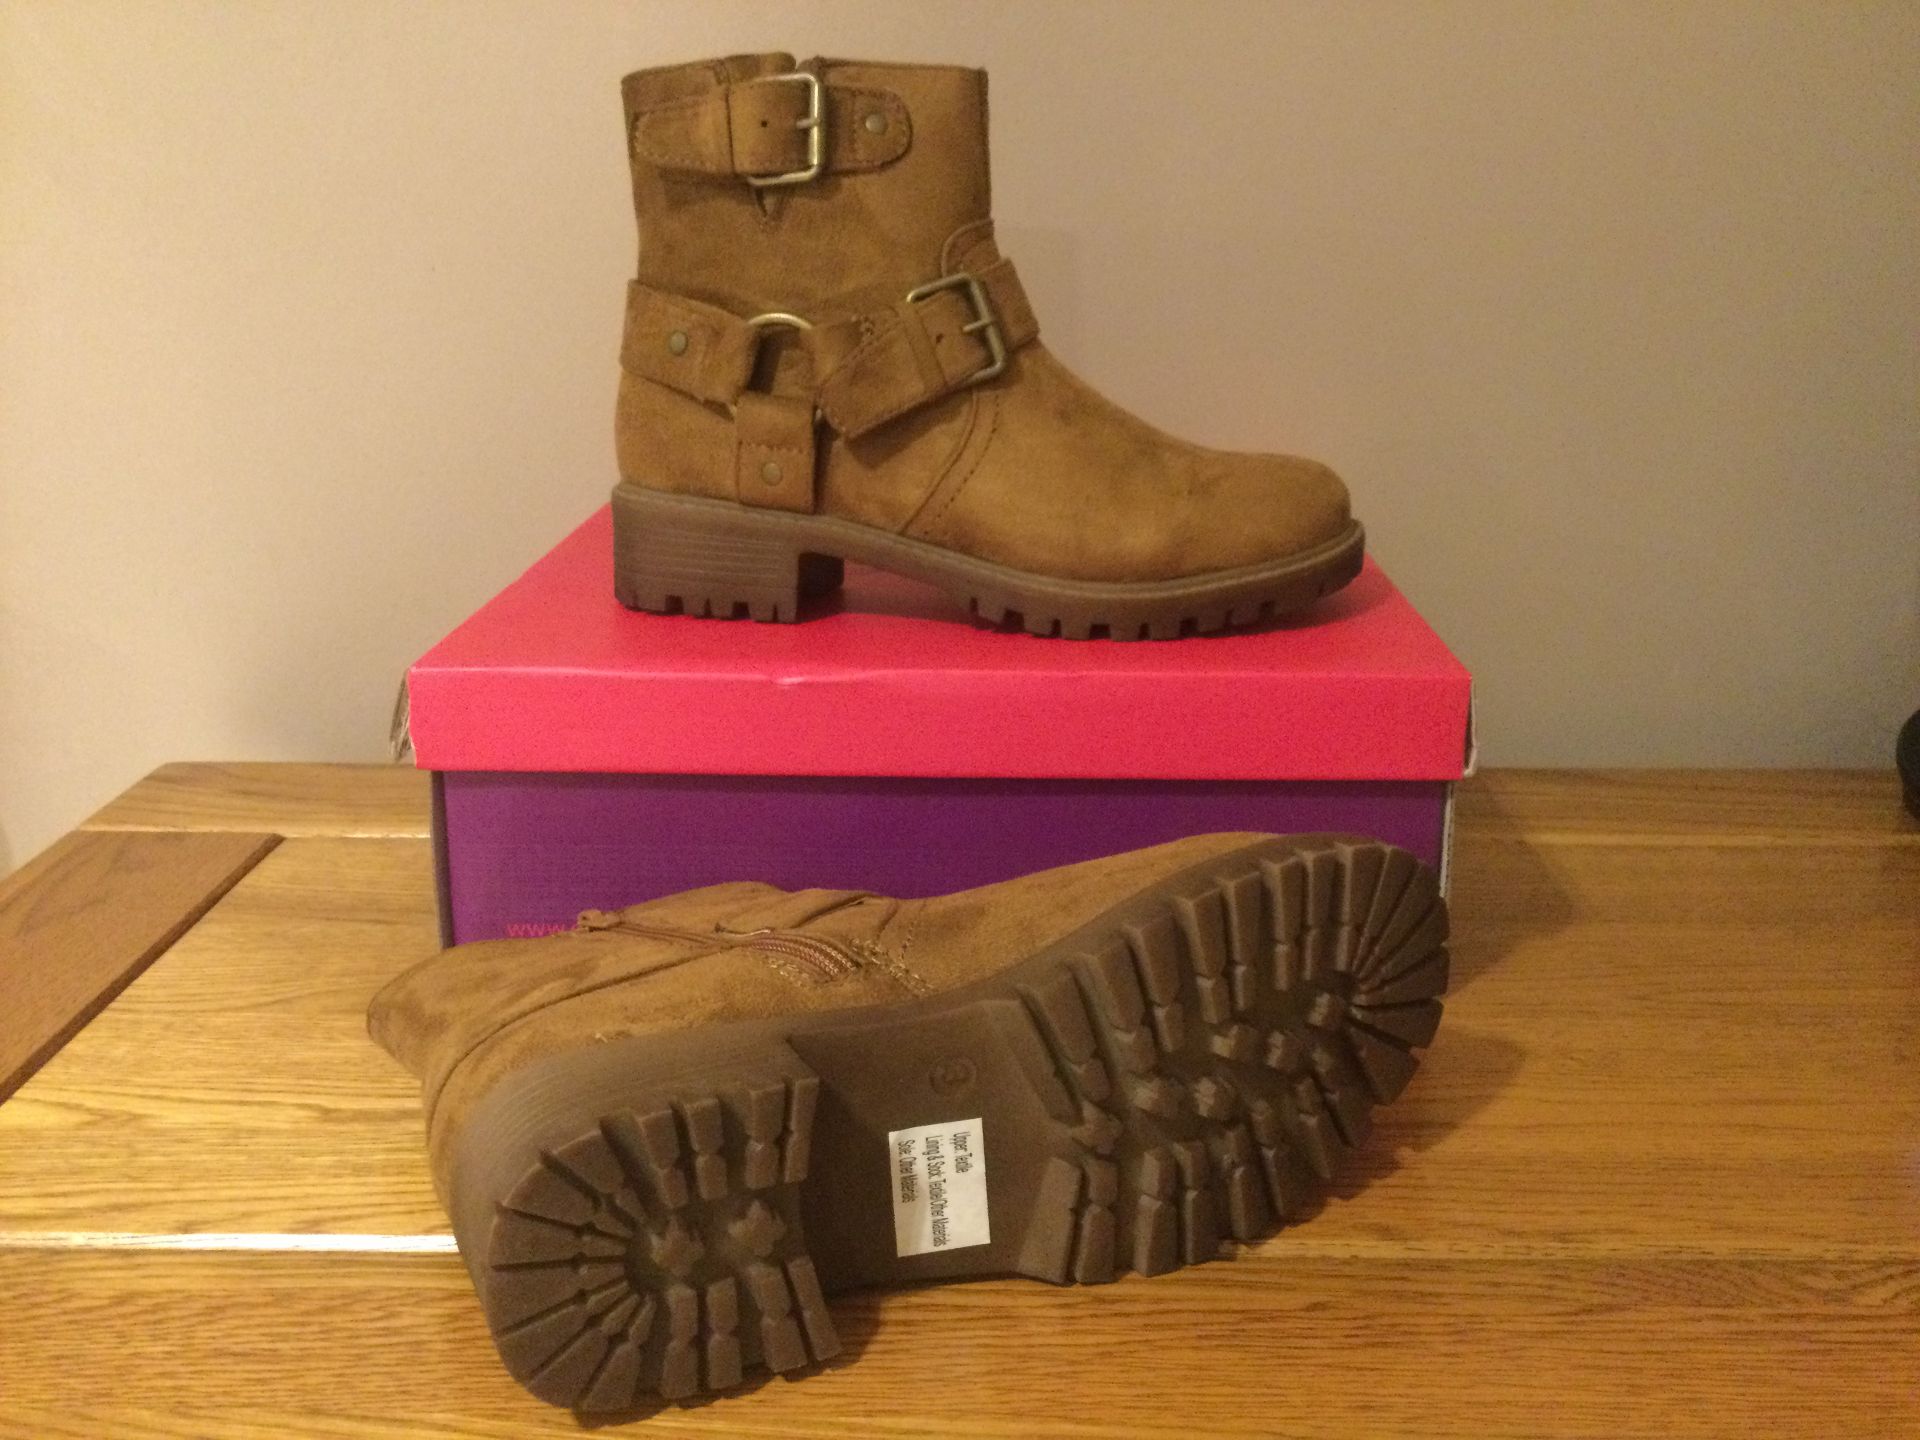 Dolcis “Davis” Ankle Boots, Size 4, Tan - New RRP £49.00 - Image 3 of 4